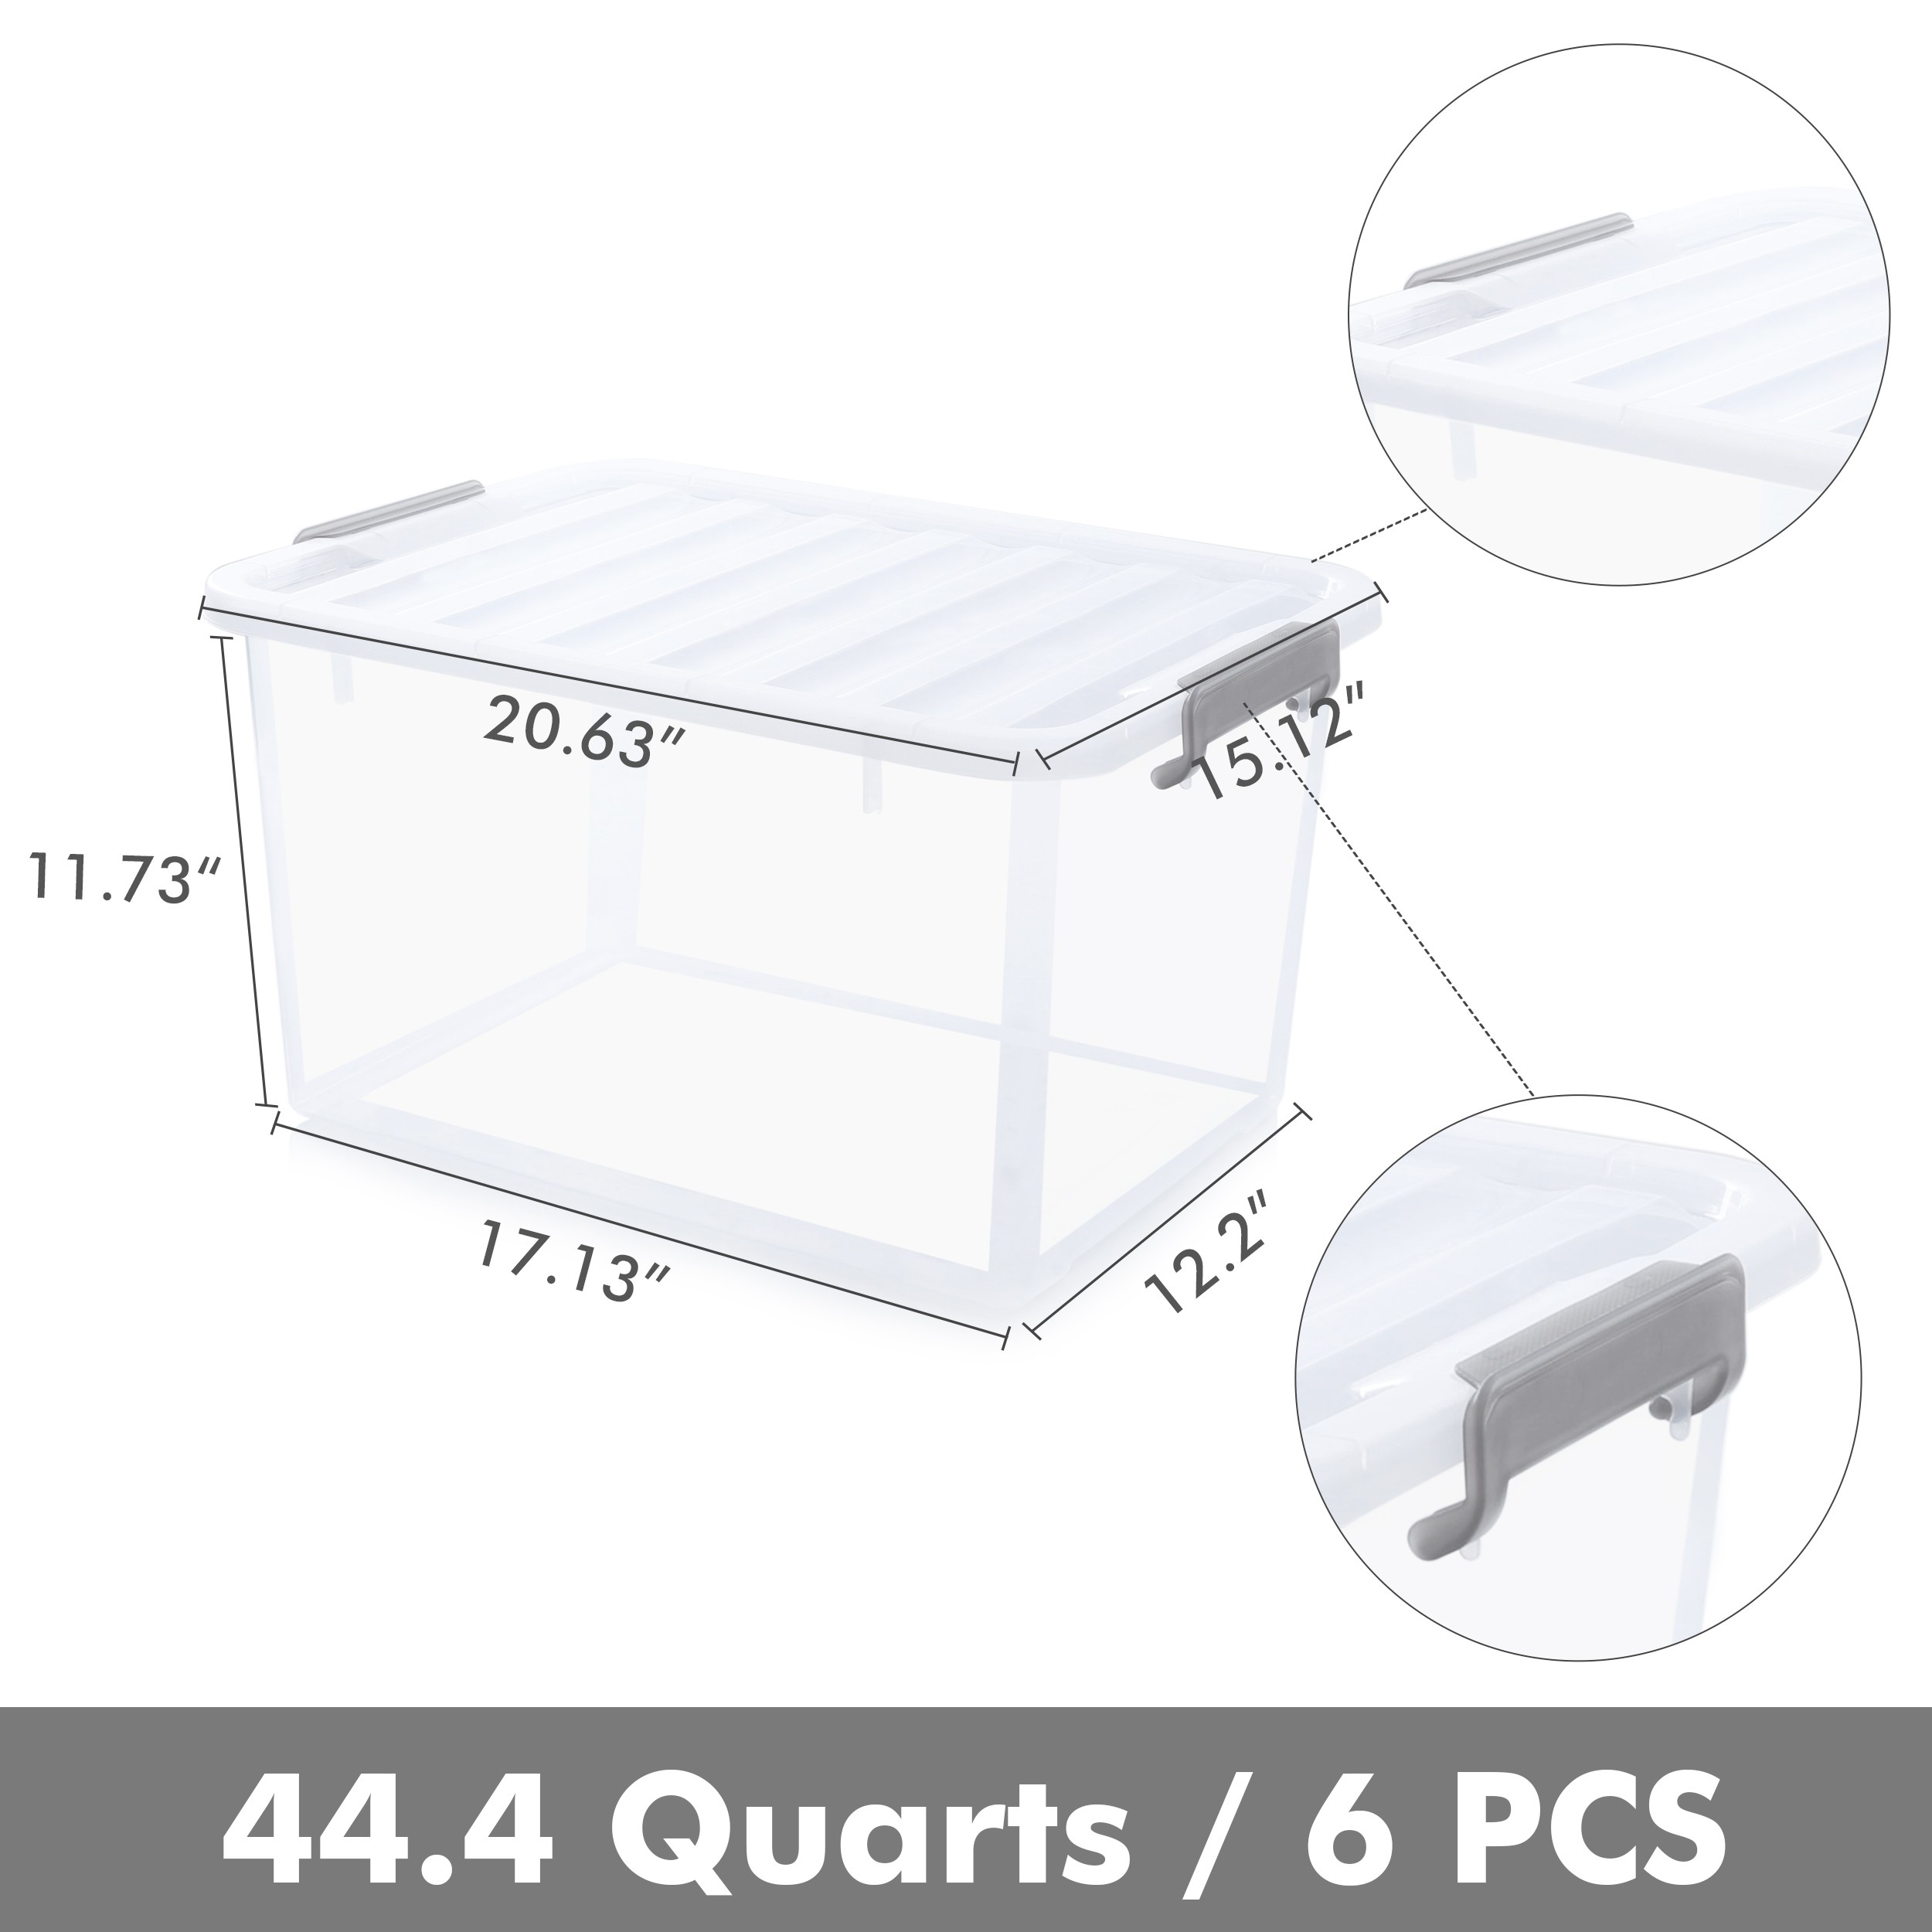  Citylife 32 QT Plastic Storage Bins with Latching Lids  Stackable Storage Containers for Organizing Large Clear Storage Box for  Garage, Closet, Classroom, Kitchen, 4 Packs